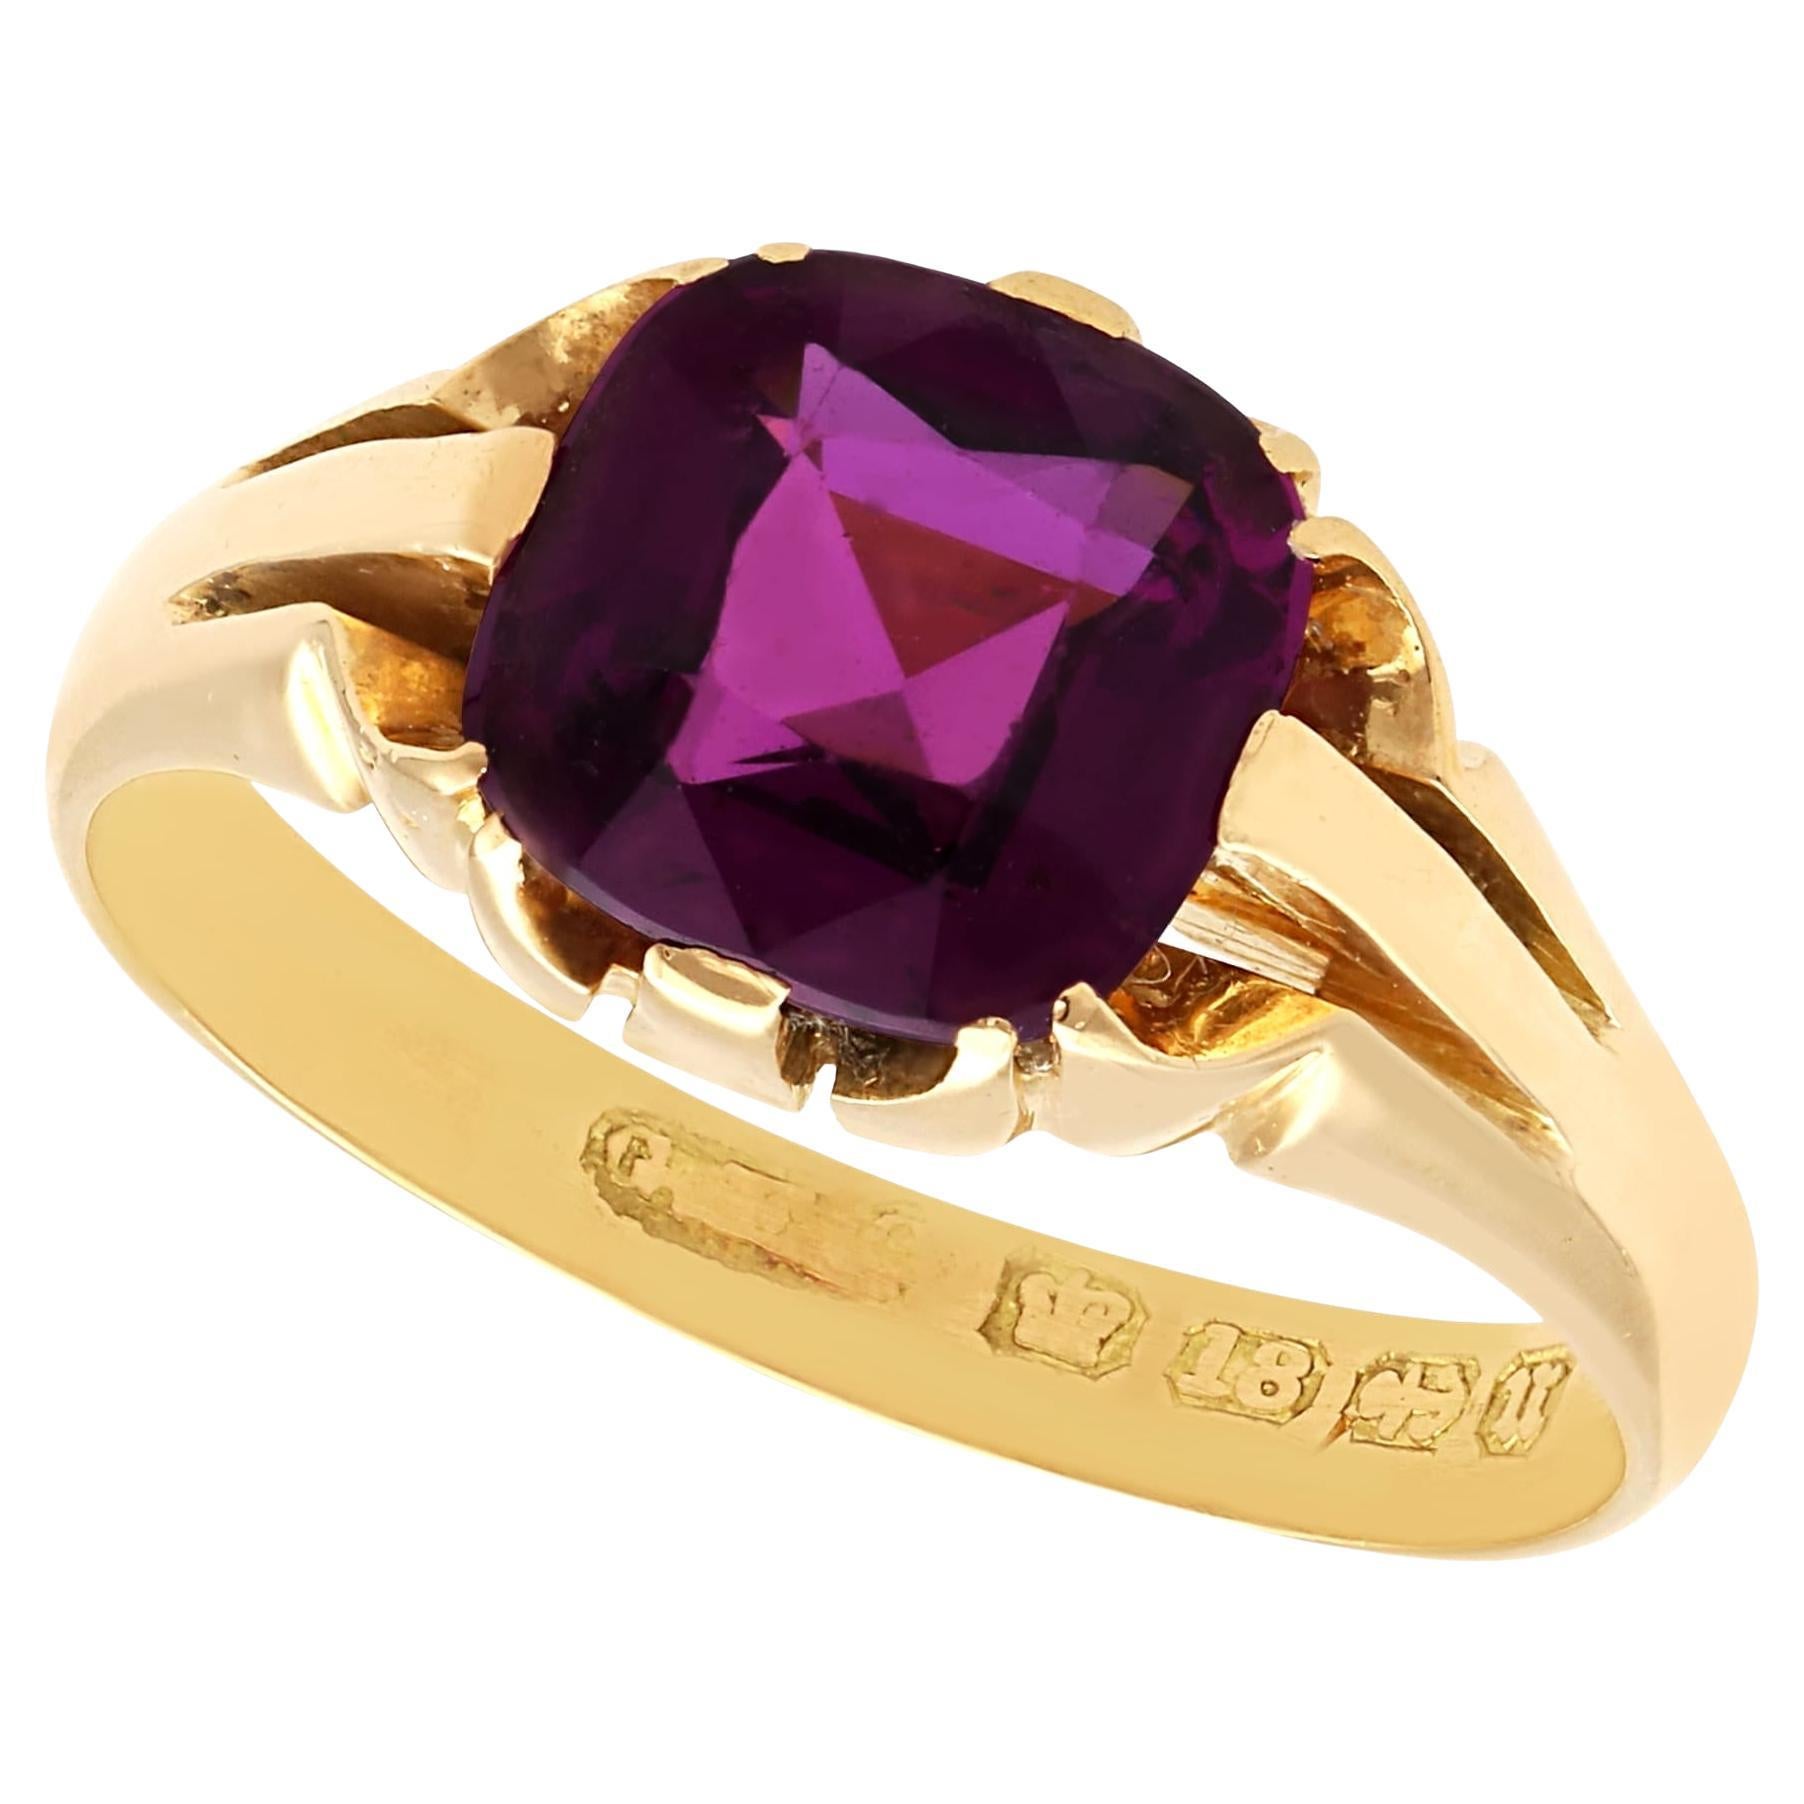 Antique Victorian 3.84 Carat Garnet and 18k Yellow Gold Dress Ring For Sale